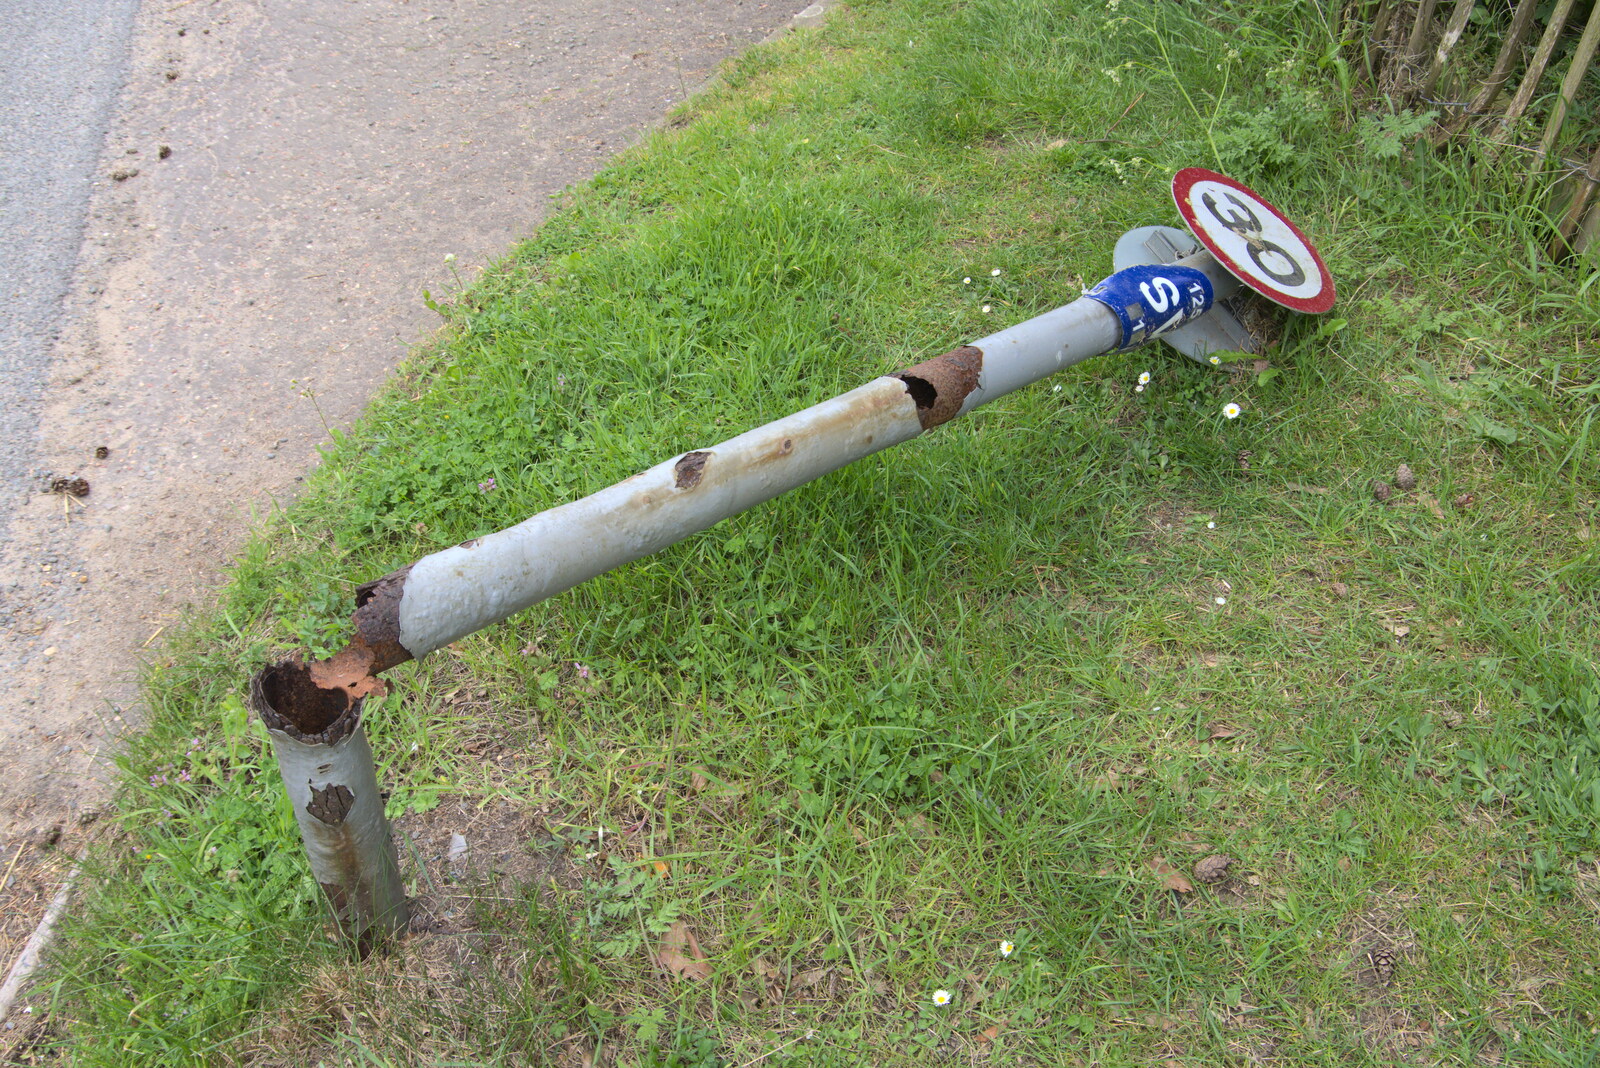 A 30mph sign has rusted out and fallen over from The Quest for Rapsy Tapsy Lane, Eye, Suffolk - 6th May 2020